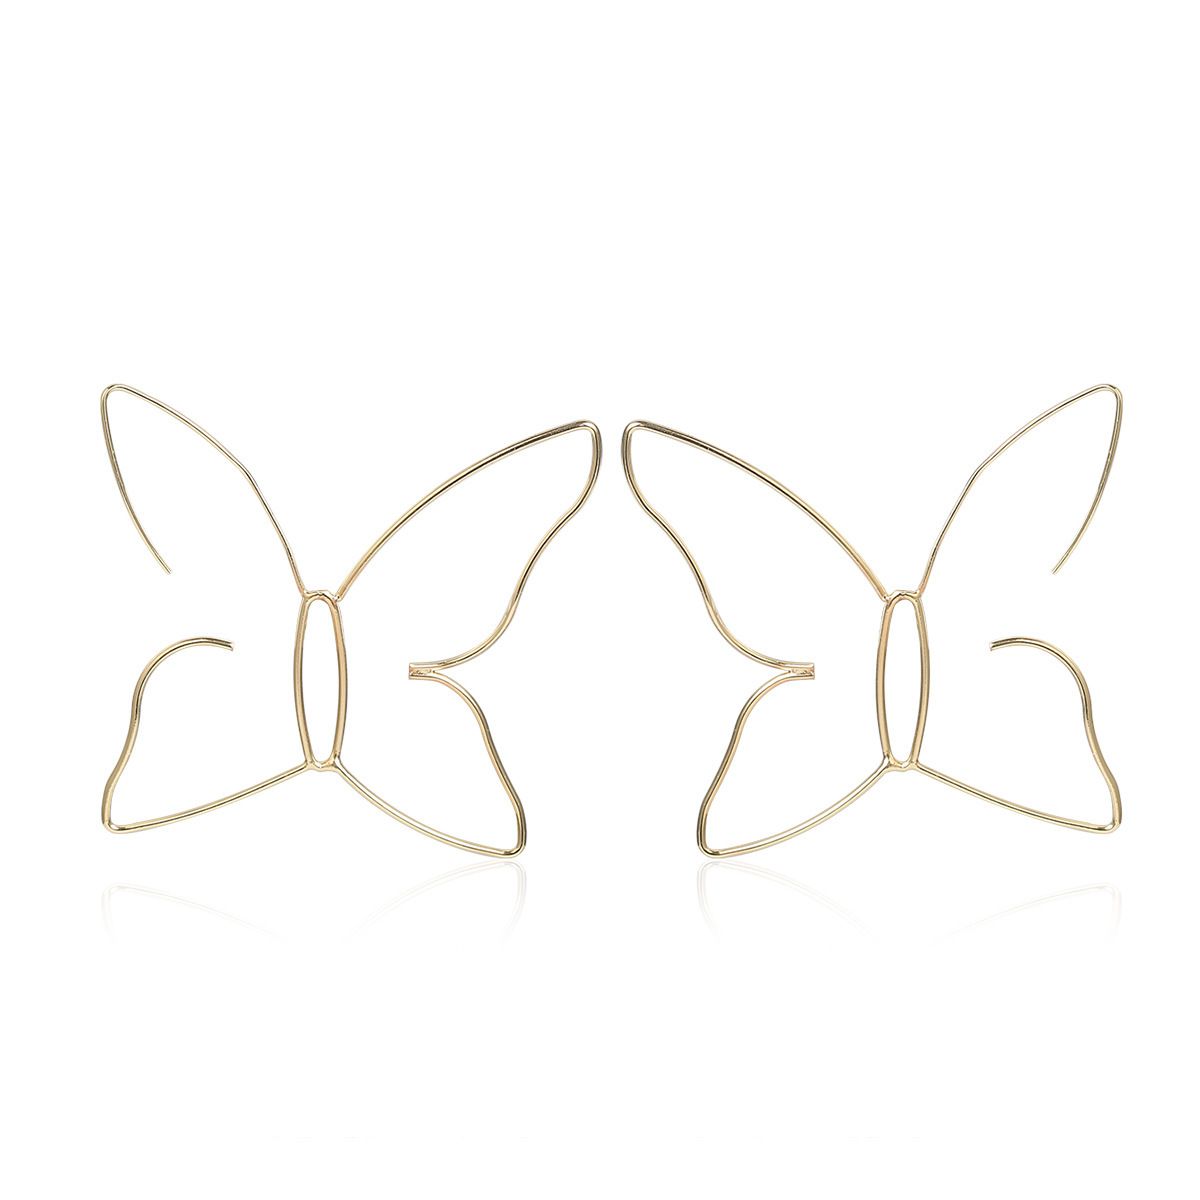 Fashionable Copper Earrings with Stylish Butterfly Design for Women Across Borders